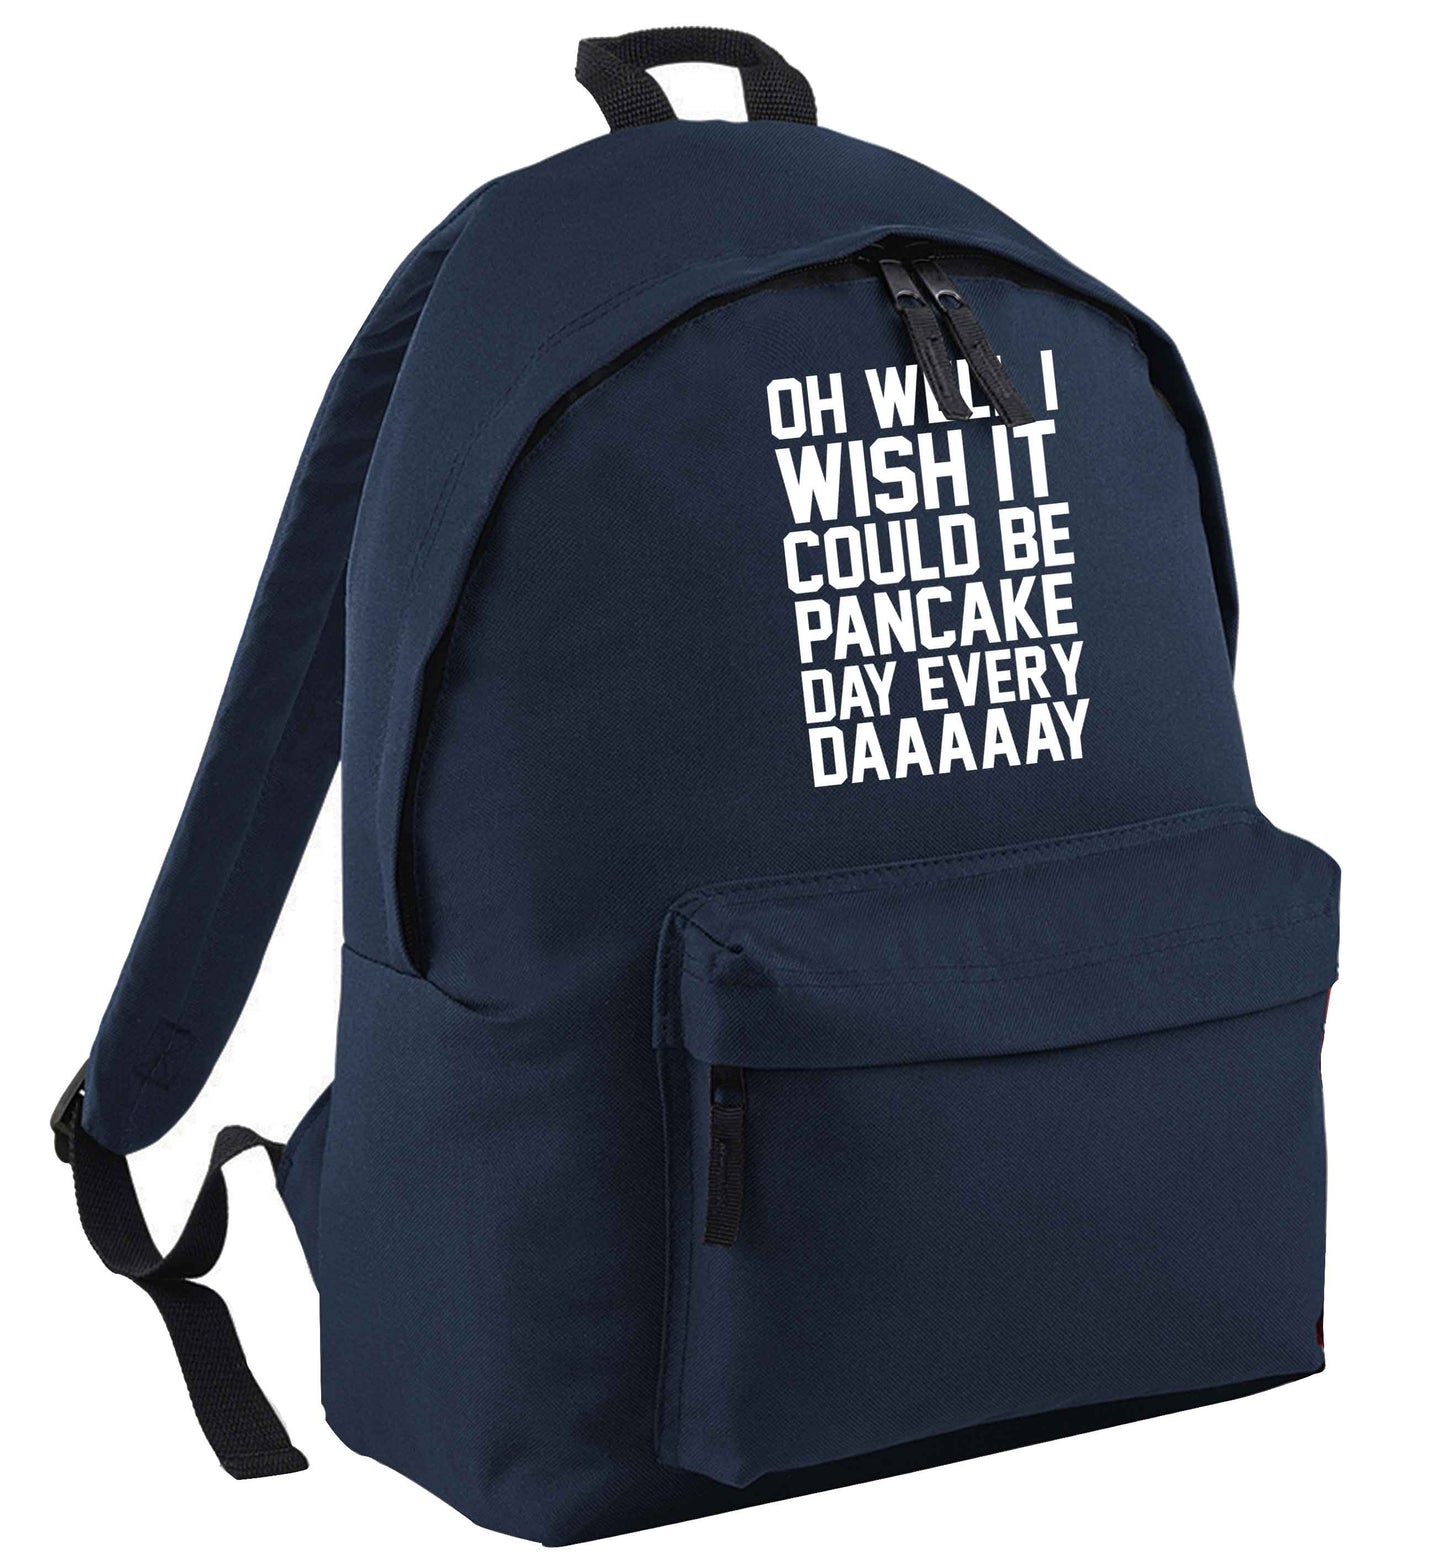 Oh well I wish it could be pancake day every day navy adults backpack